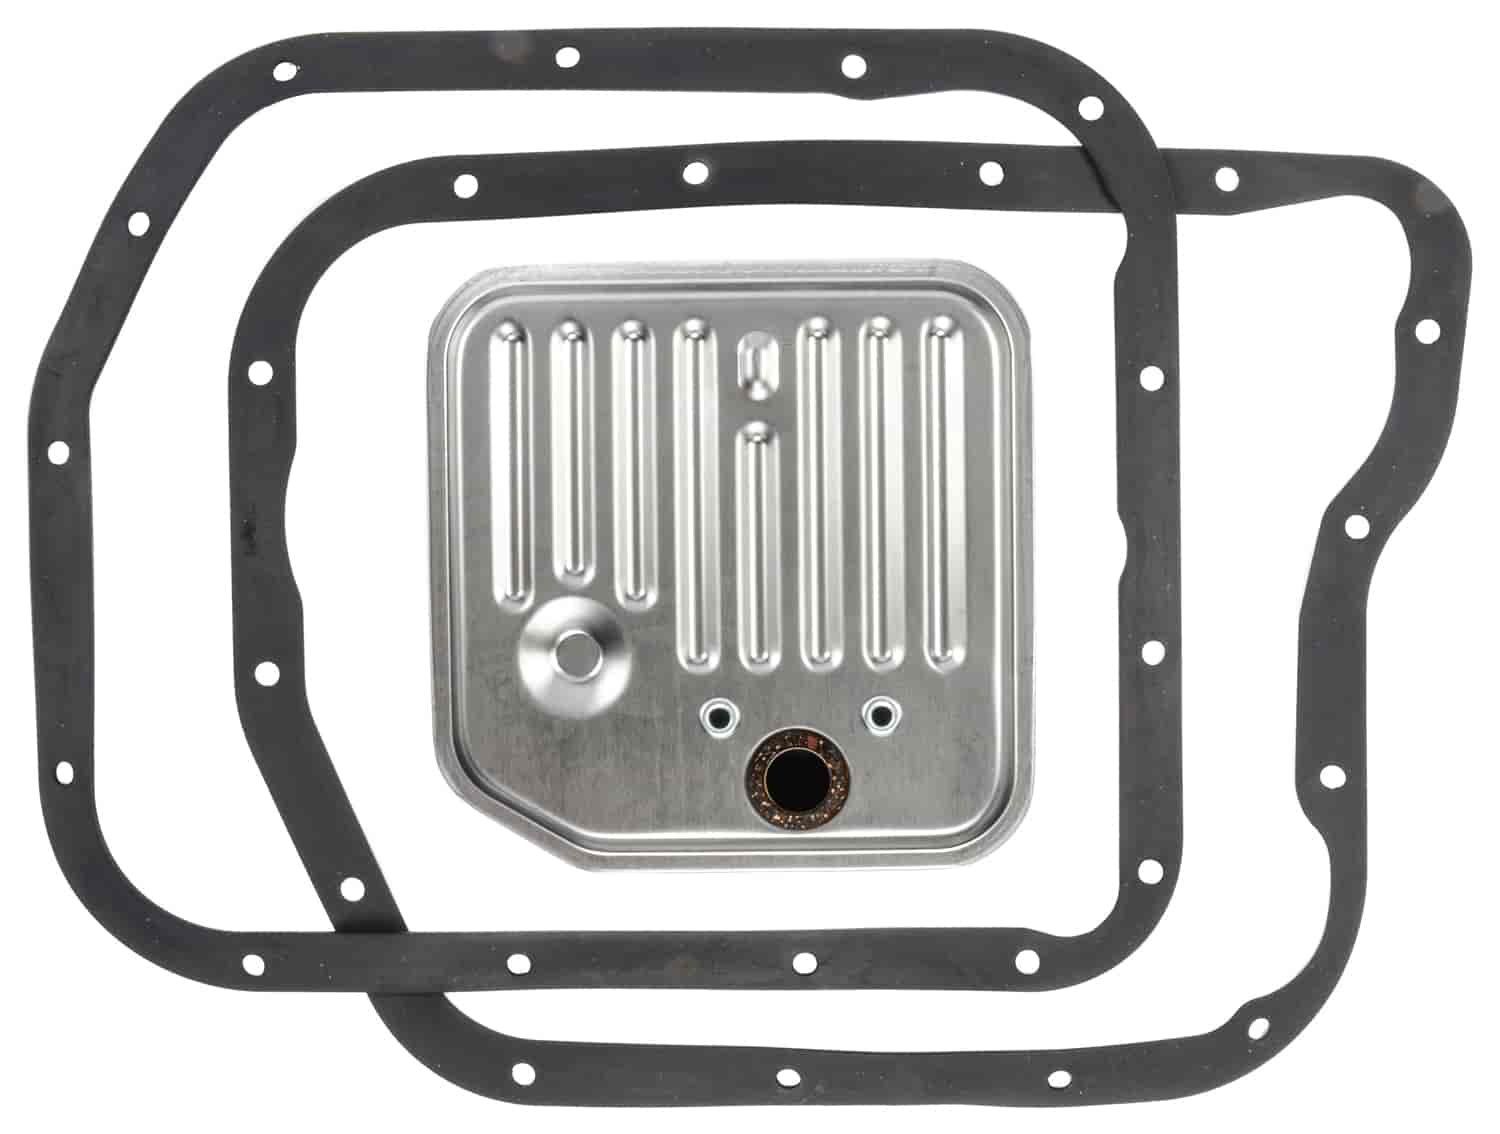 Transmission Filter and Gasket Kit for 1998-2009 Dodge and Jeep 46RE, 47RE